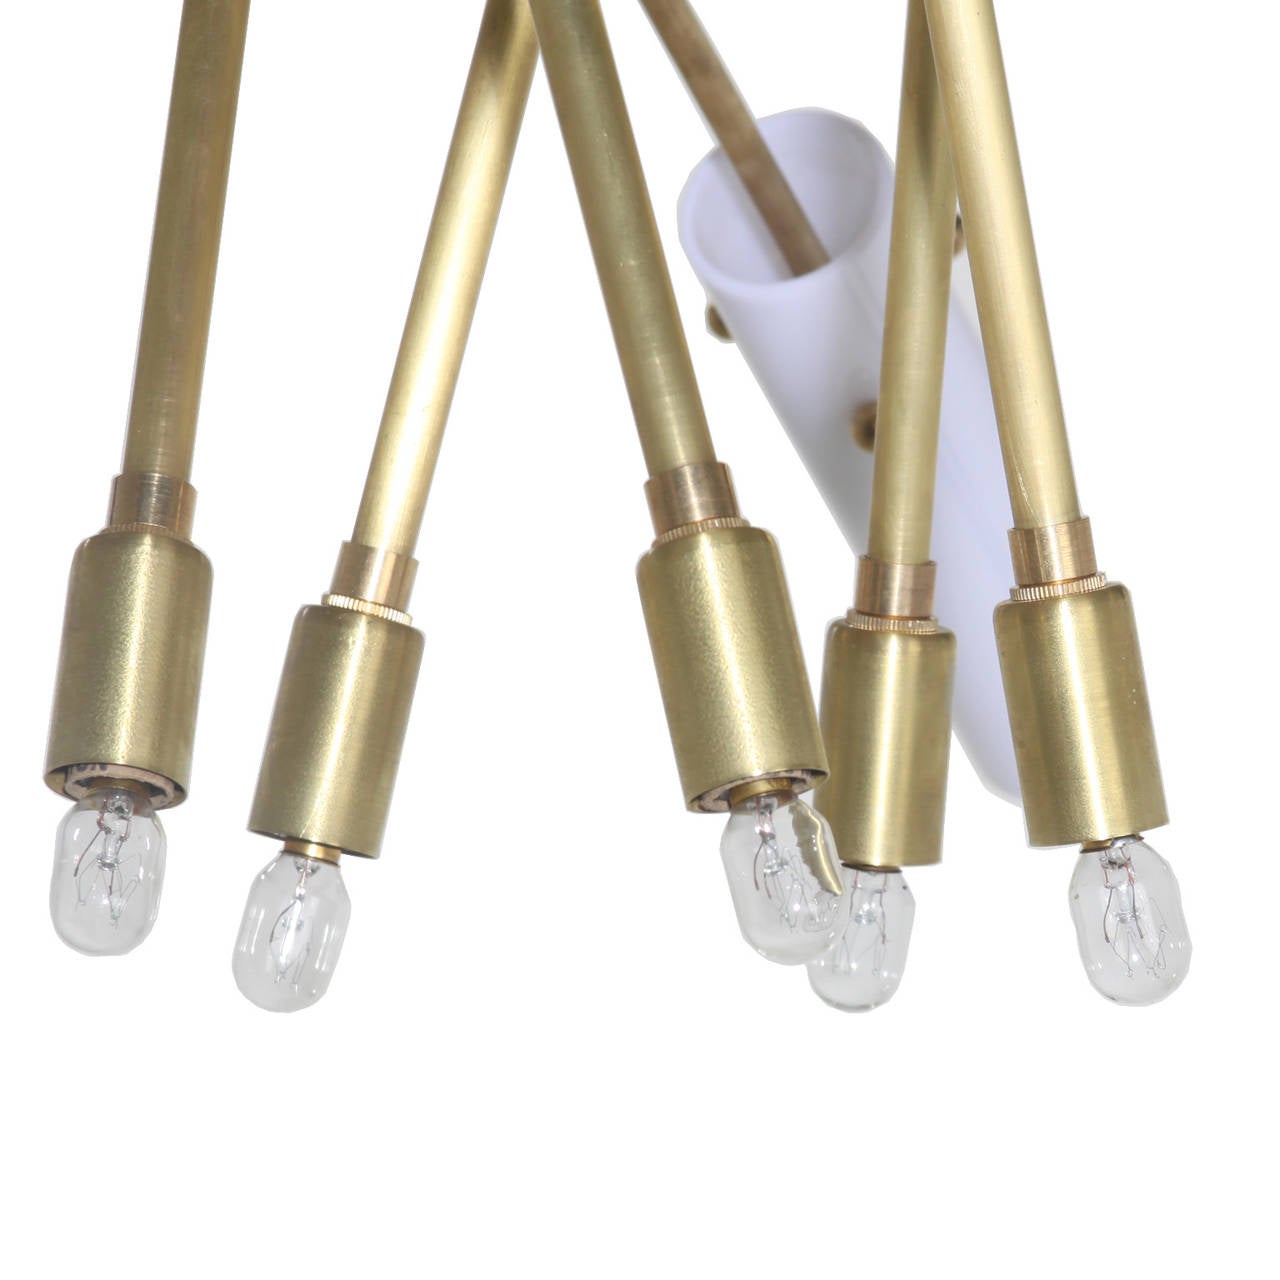 A Brass chandelier featuring five exposed bulbs and five bulbs with white glass tubular covers on adjustable, jointed arms. The adjustable arms affect the overall diameter and shape of the chandelier, the shortest hanging height is 29